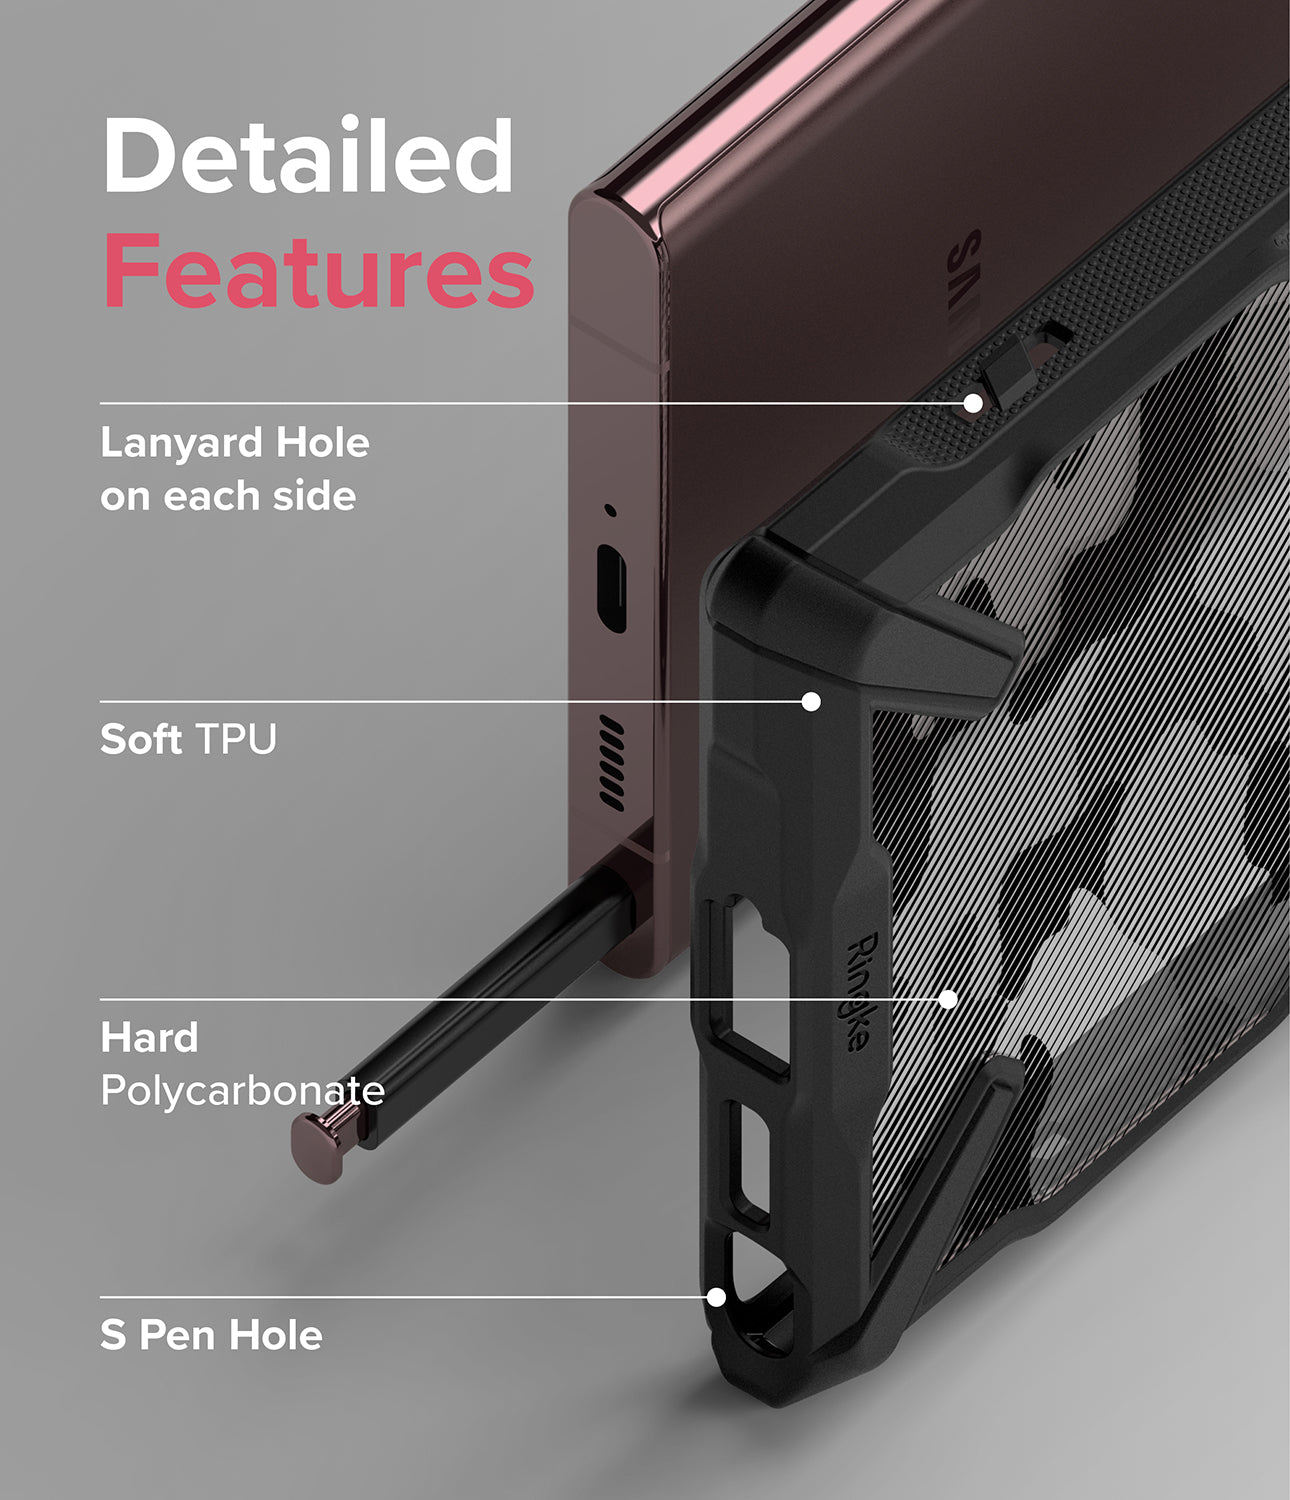 Galaxy S22 Ultra Case | Fusion-X - Camo Black - By Ringke - Detailed Features. Lanyard Hole on each side. Soft TPU. Hard Polycarbonate. S Pen Hole.